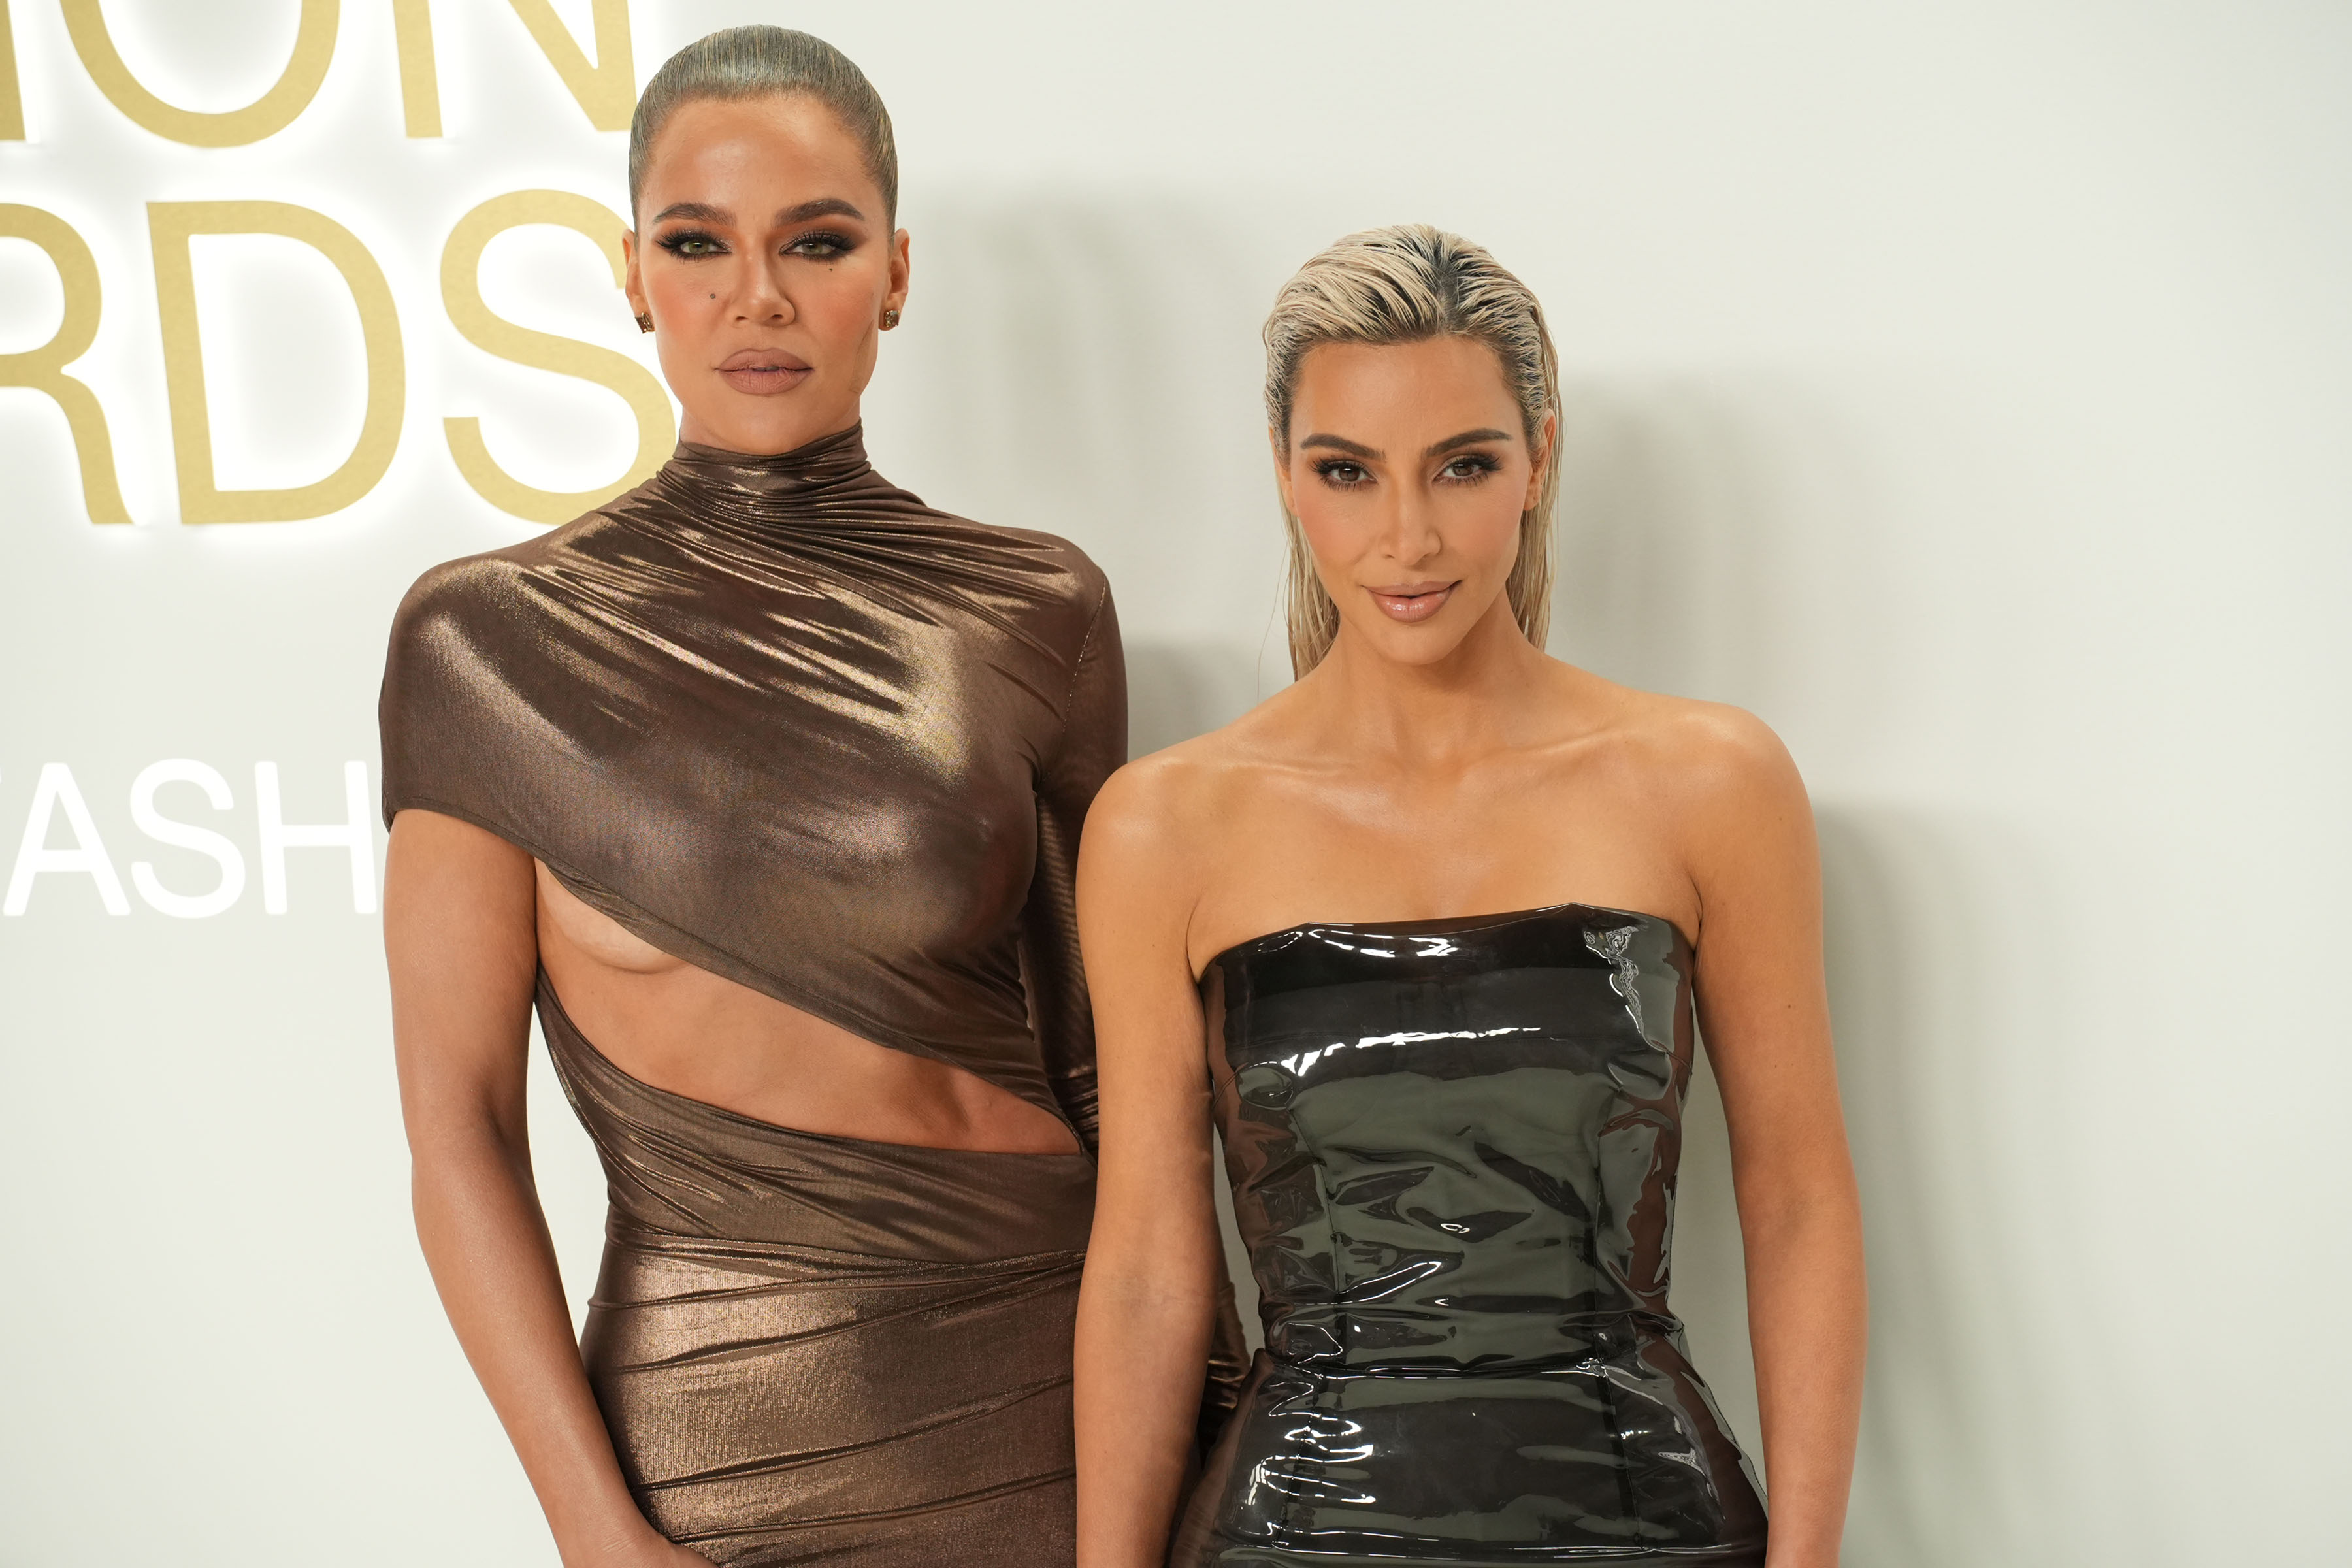 Khloe and Kim have long been scrutinized for their body transformations, though both have been adamant about not undergoing plastic surgery